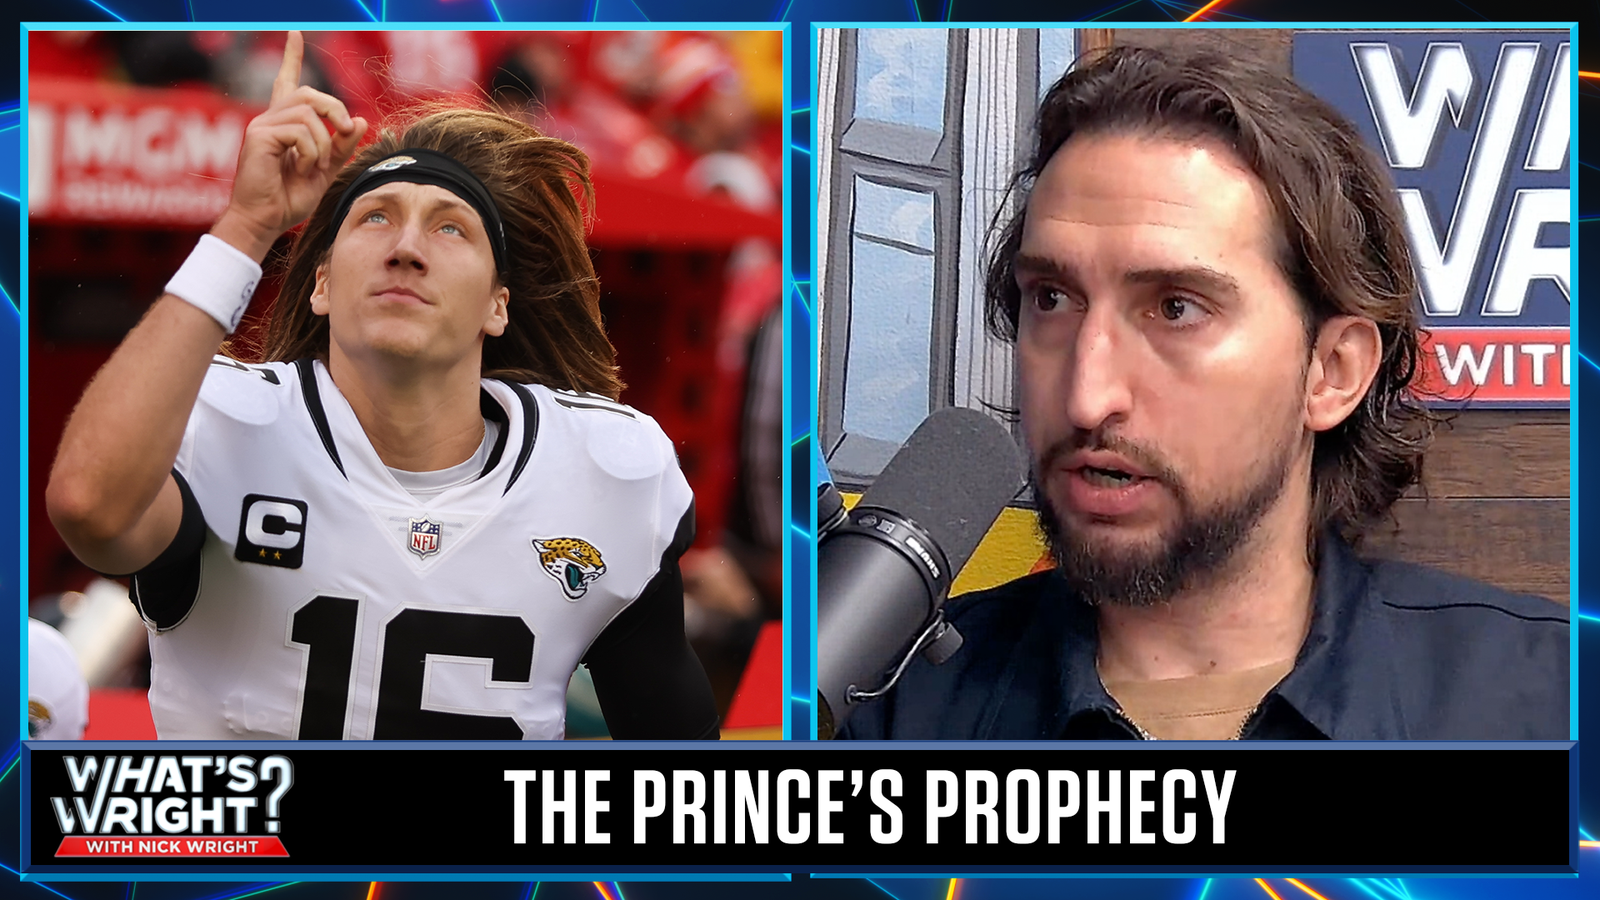 Nick Wright predicts a Super Bowl appearance for Trevor Lawrence